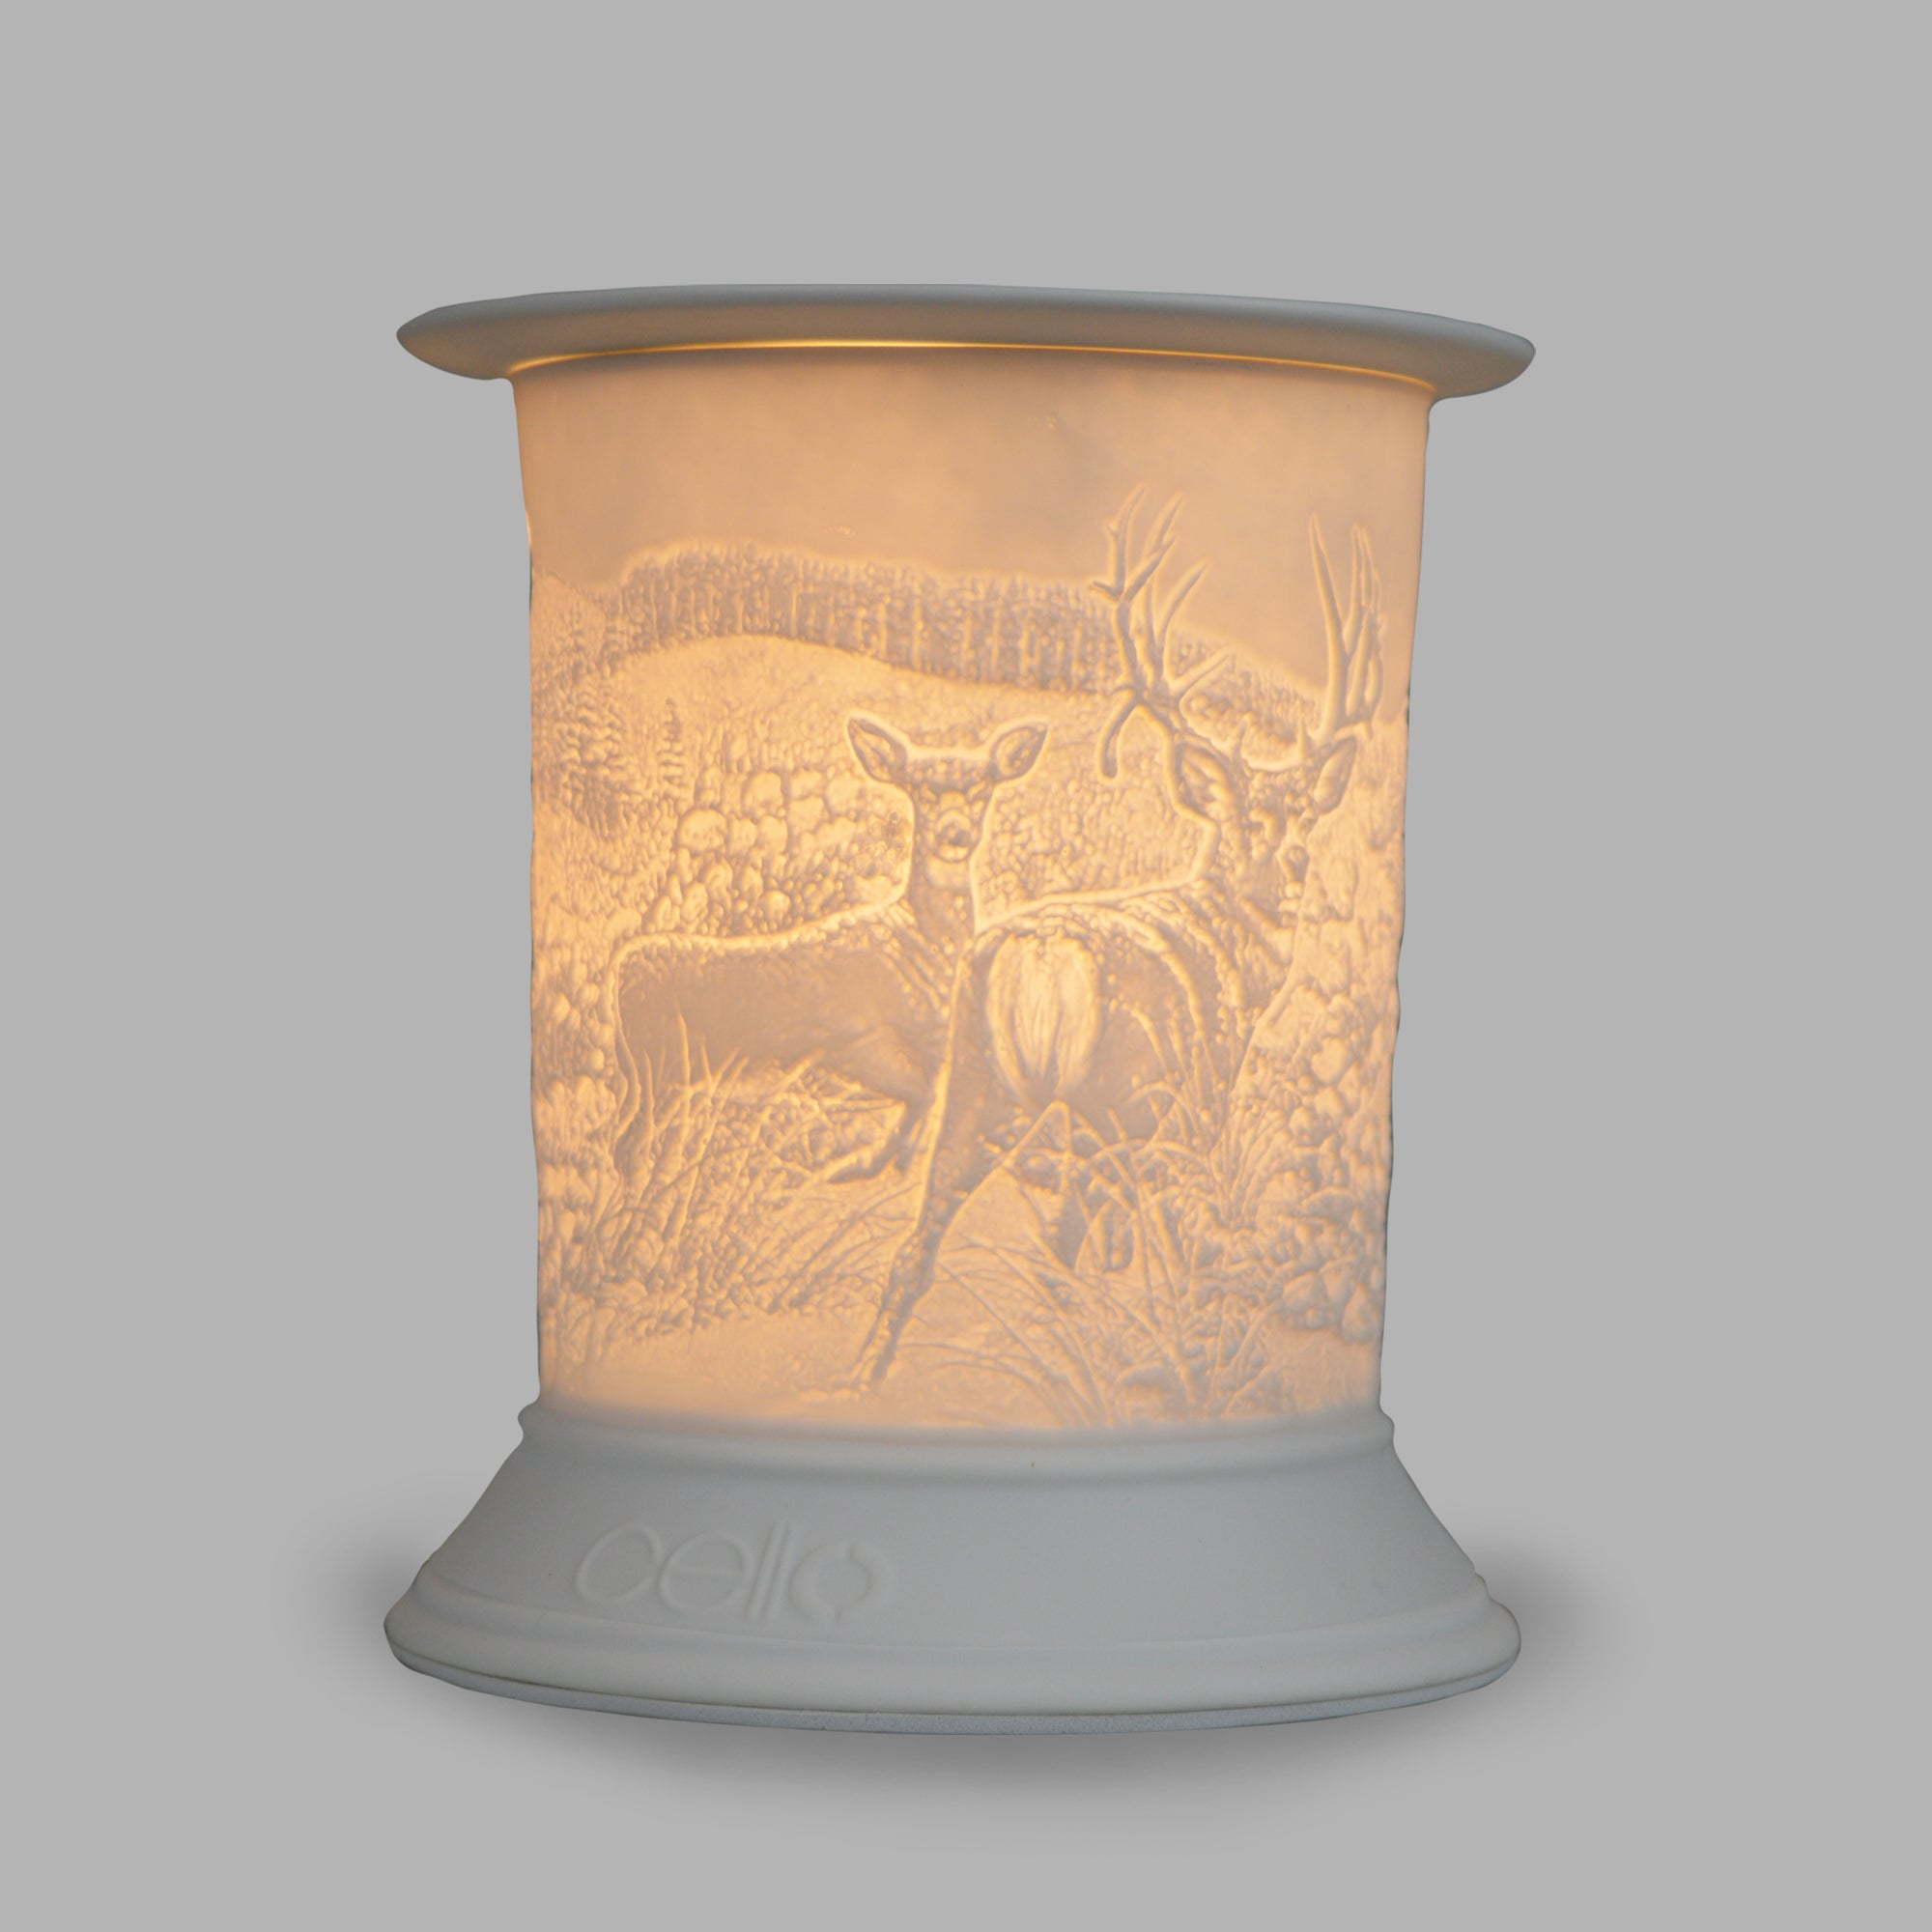 Cello Straight Electric Wax Burner - Highland Stag